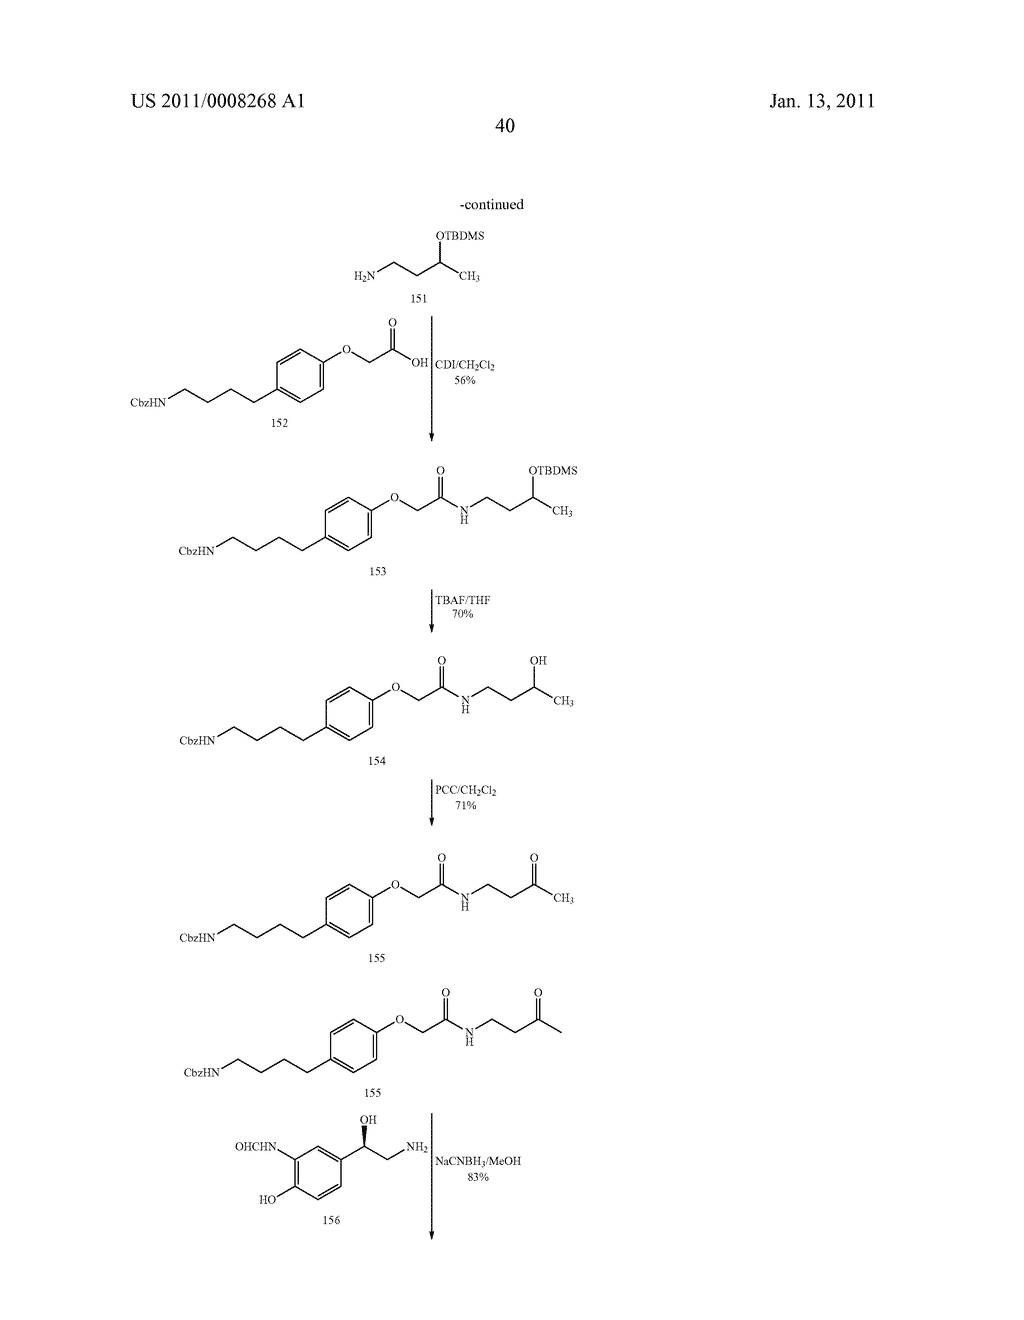 PHENYL SUBSTITUTED PYRAZINOYLGUANIDINE SODIUM CHANNEL BLOCKERS POSSESSING BETA AGONIST ACTIVITY - diagram, schematic, and image 45